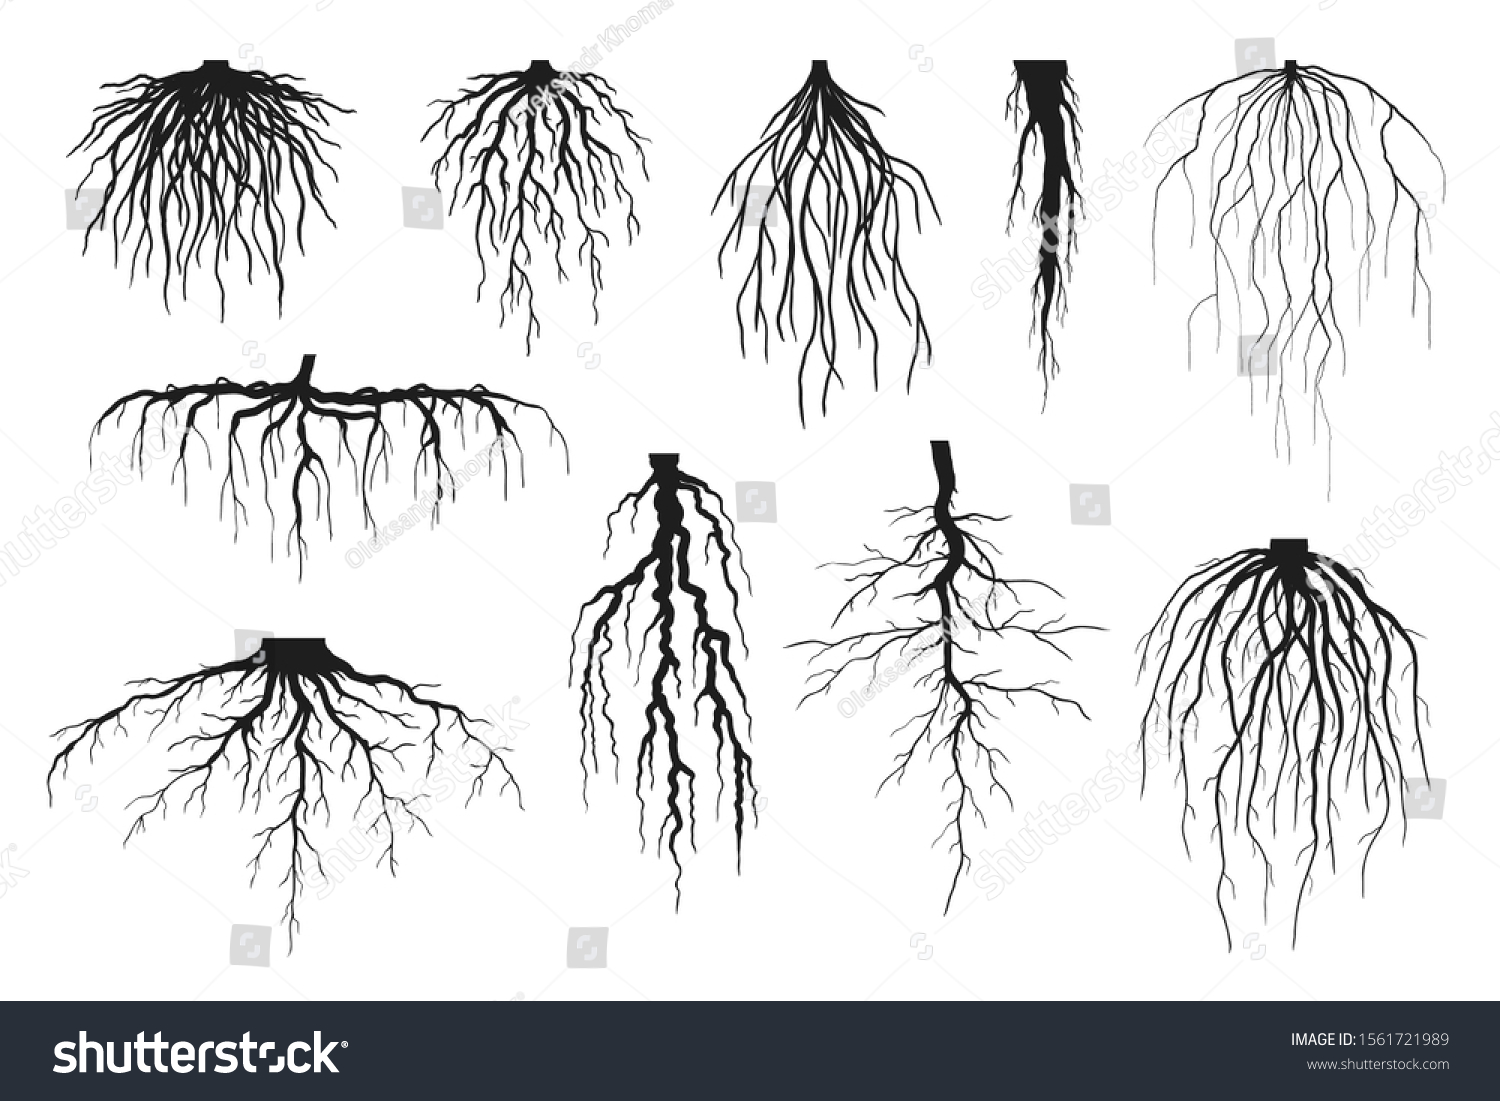 Tree roots silhouettes isolated on white, vector set of taproot and fibrous root systems of various plants, realistic black roots illustrations #1561721989